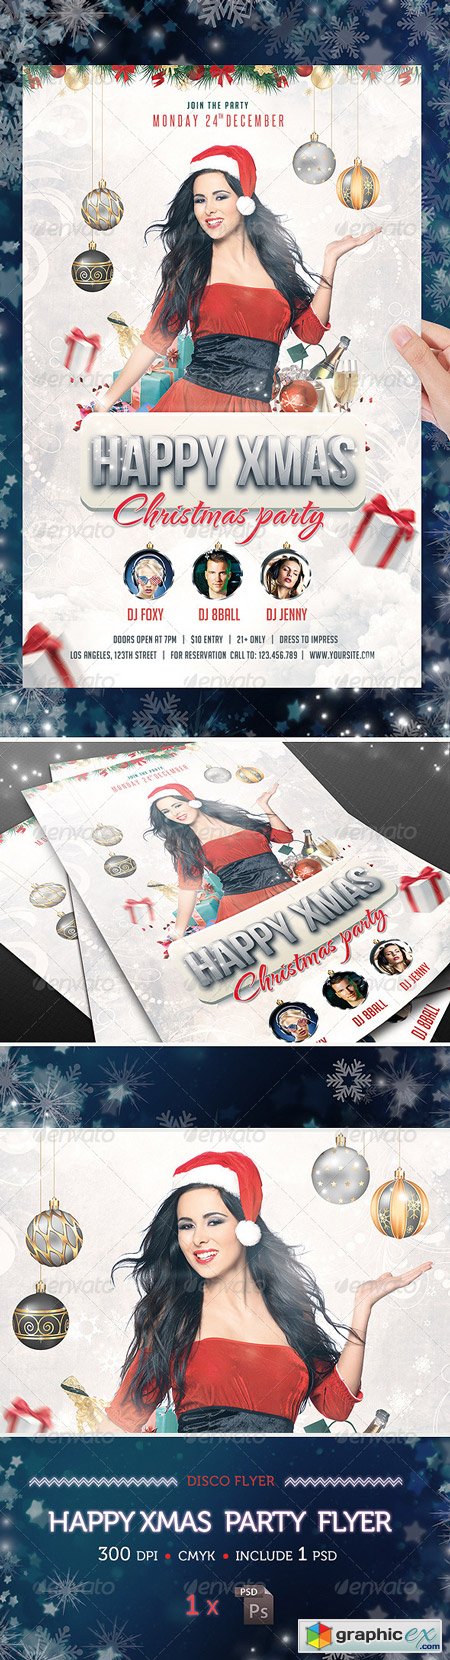 Christmas Party Flyer Template 3368223